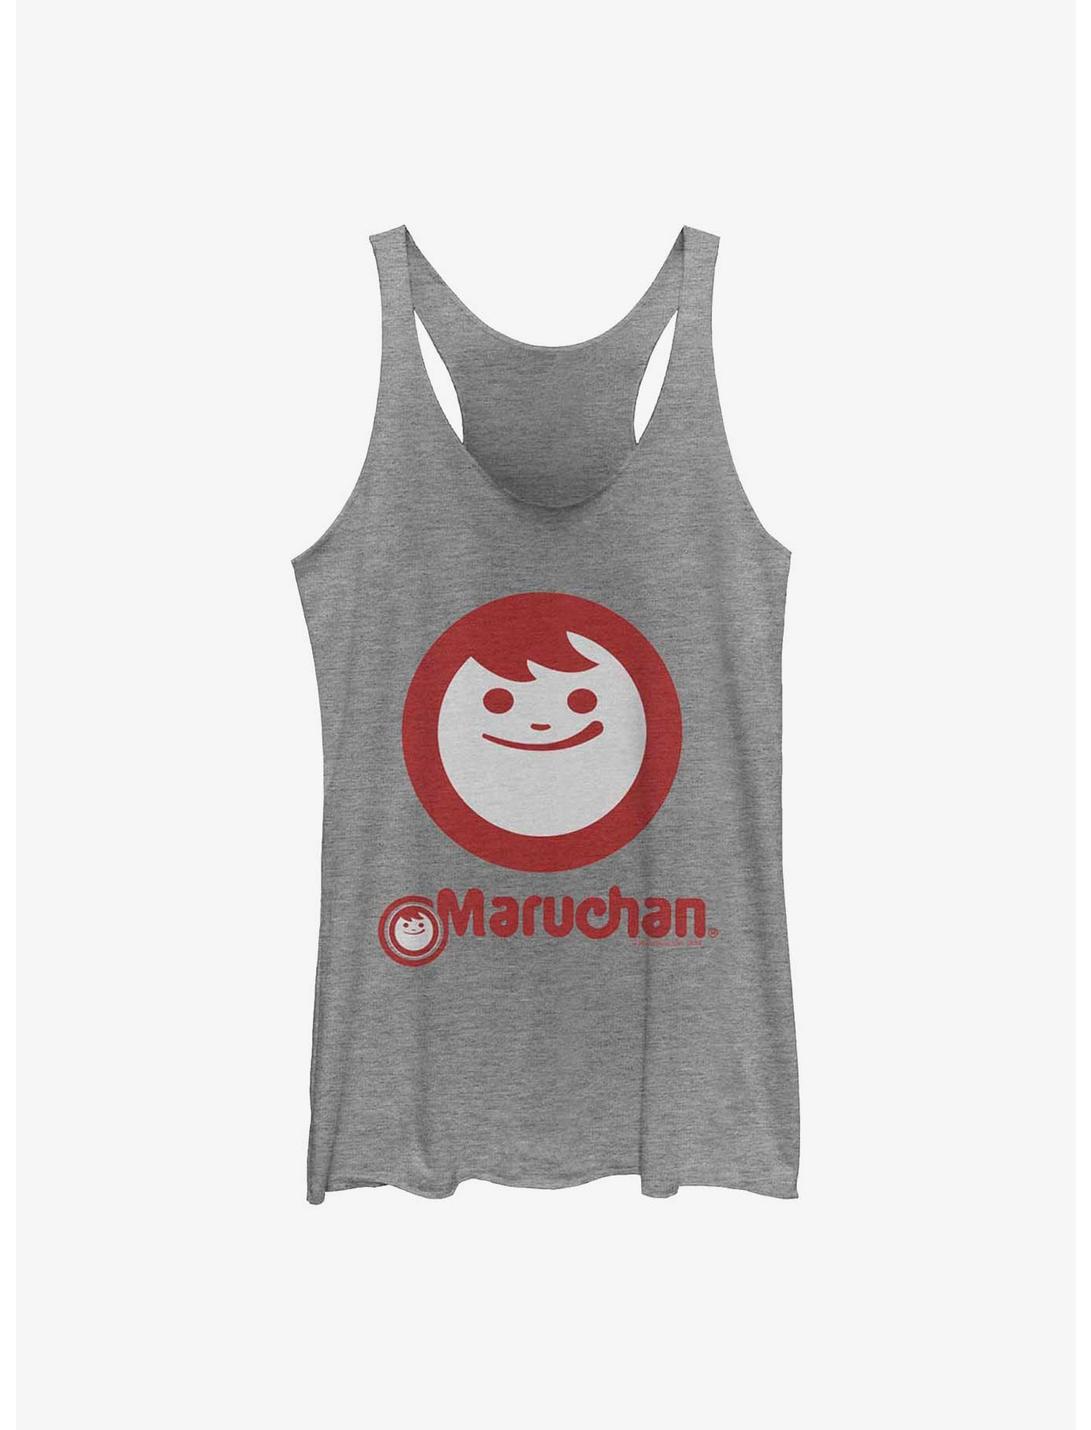 Maruchan Instant Smile Womens Tank Top, GRAY HTR, hi-res